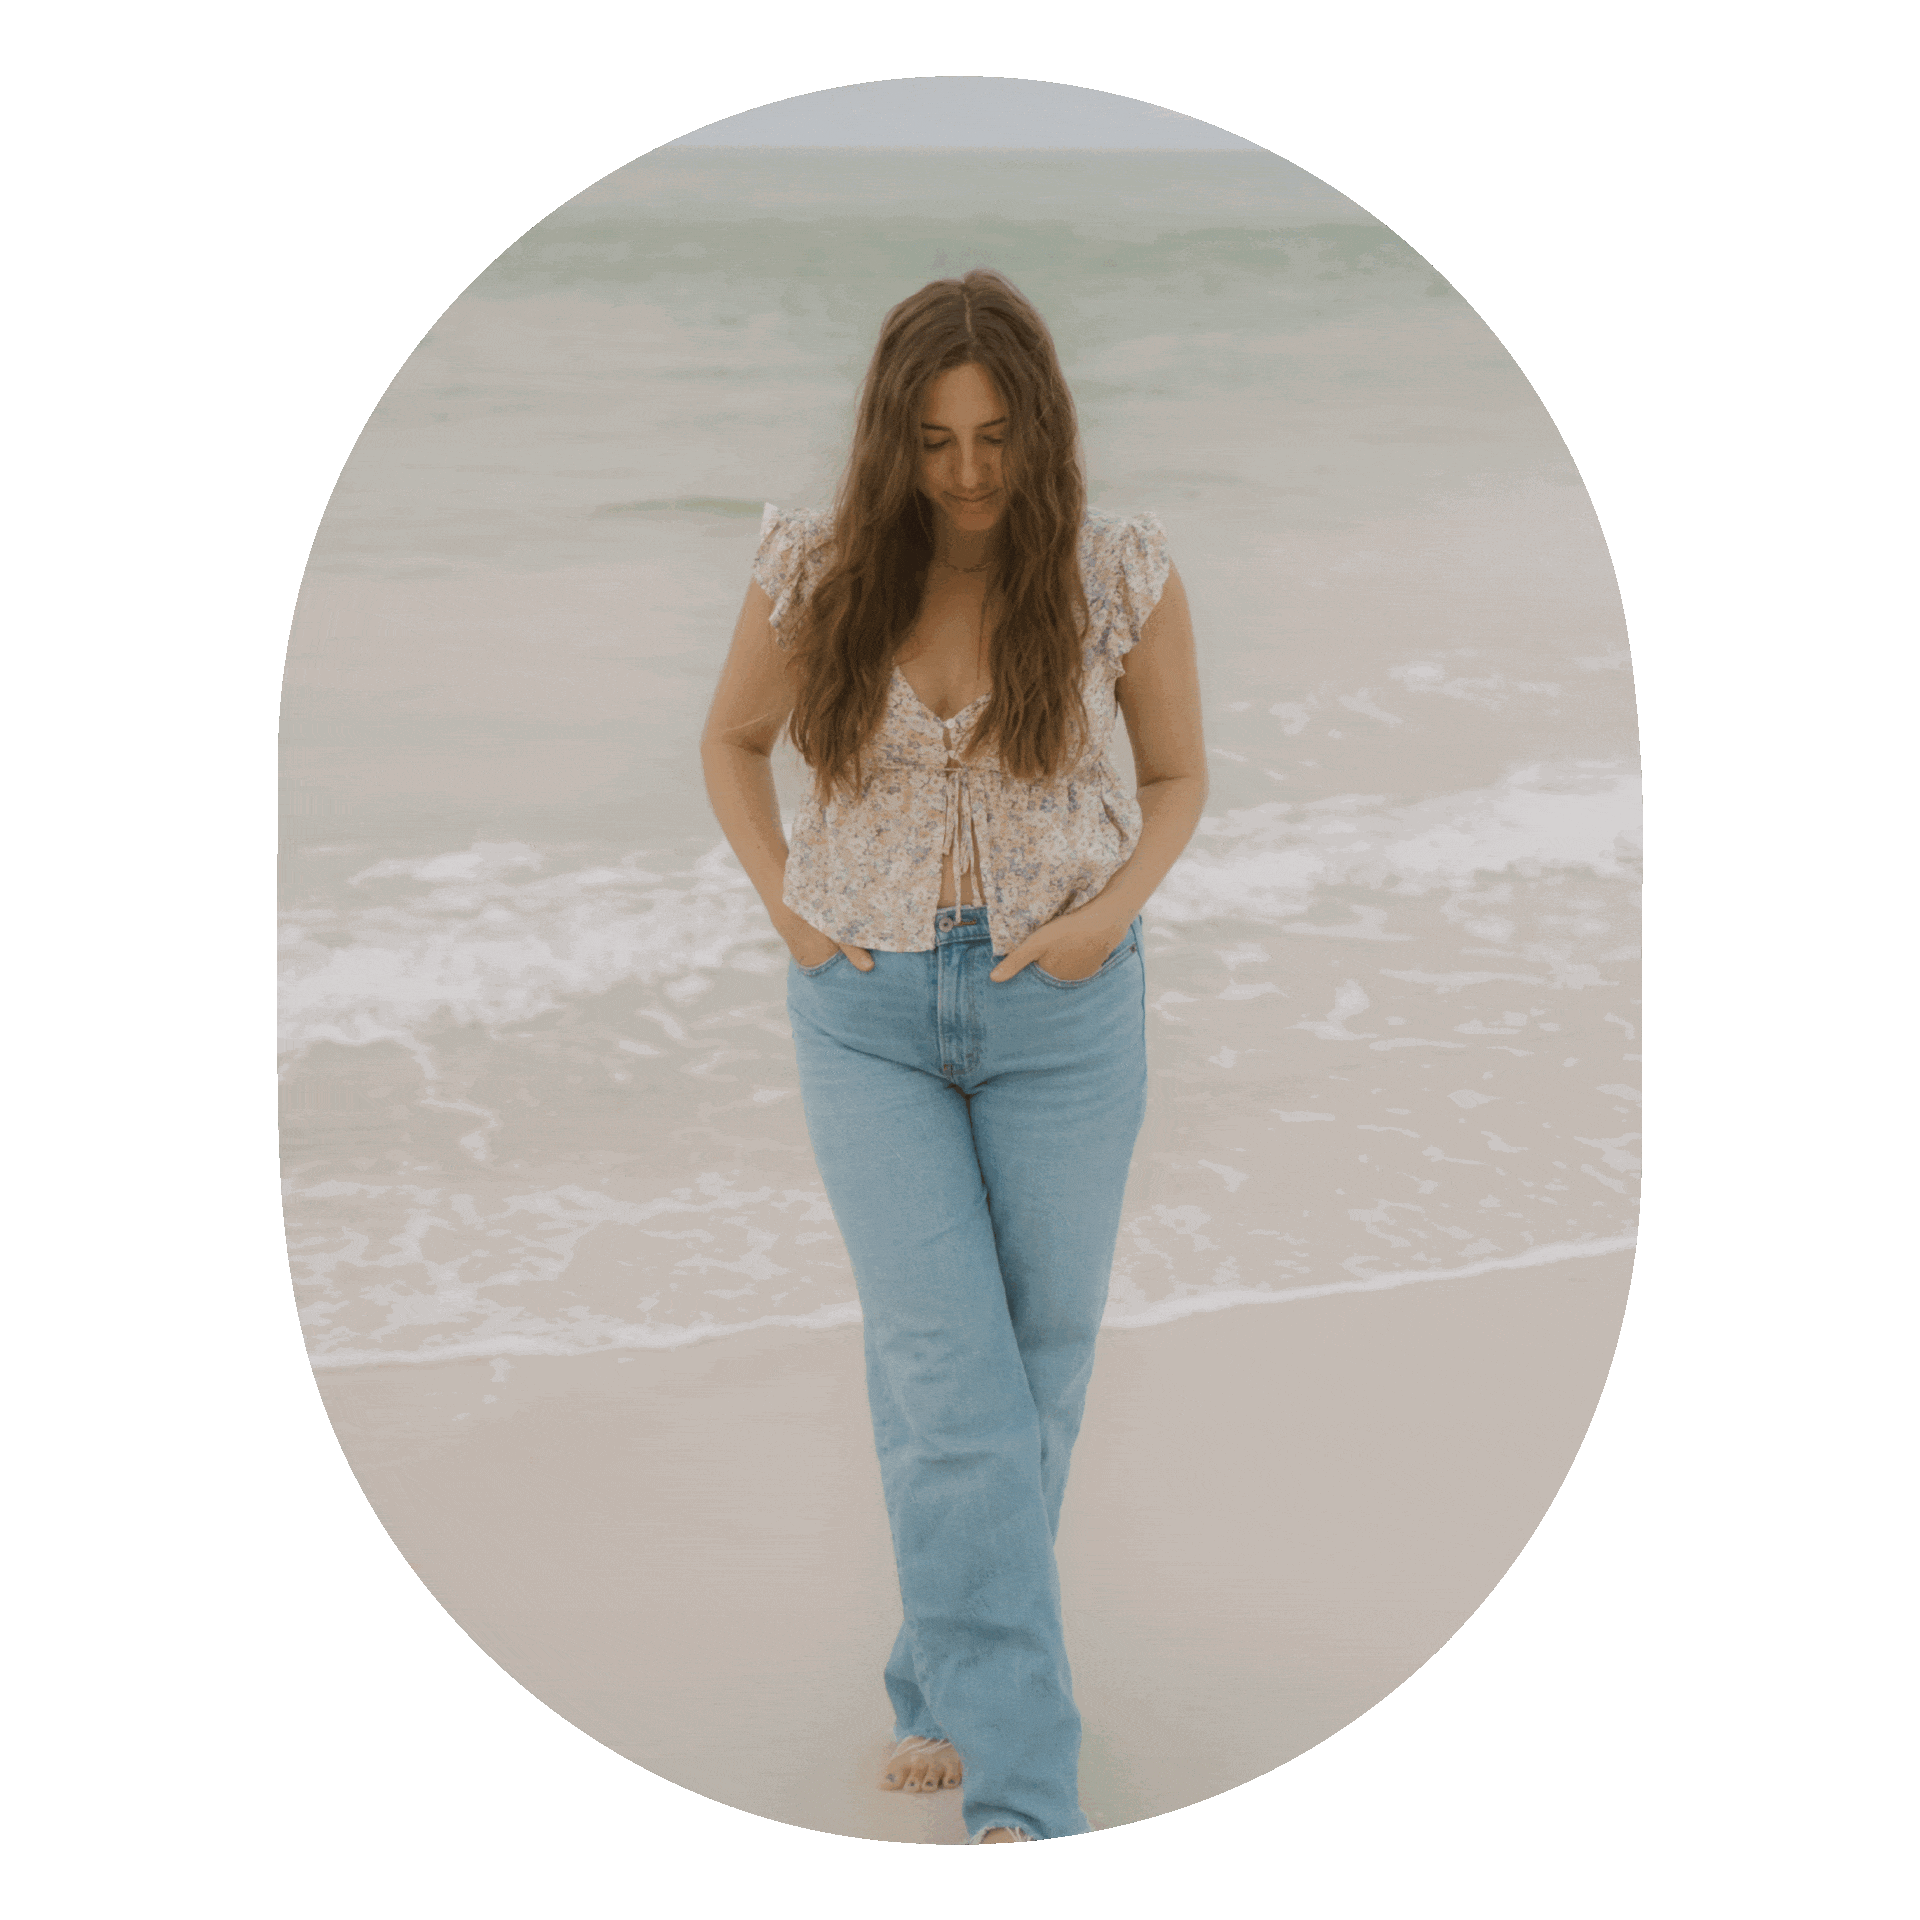 Rotating images of Cait on beach in Florida